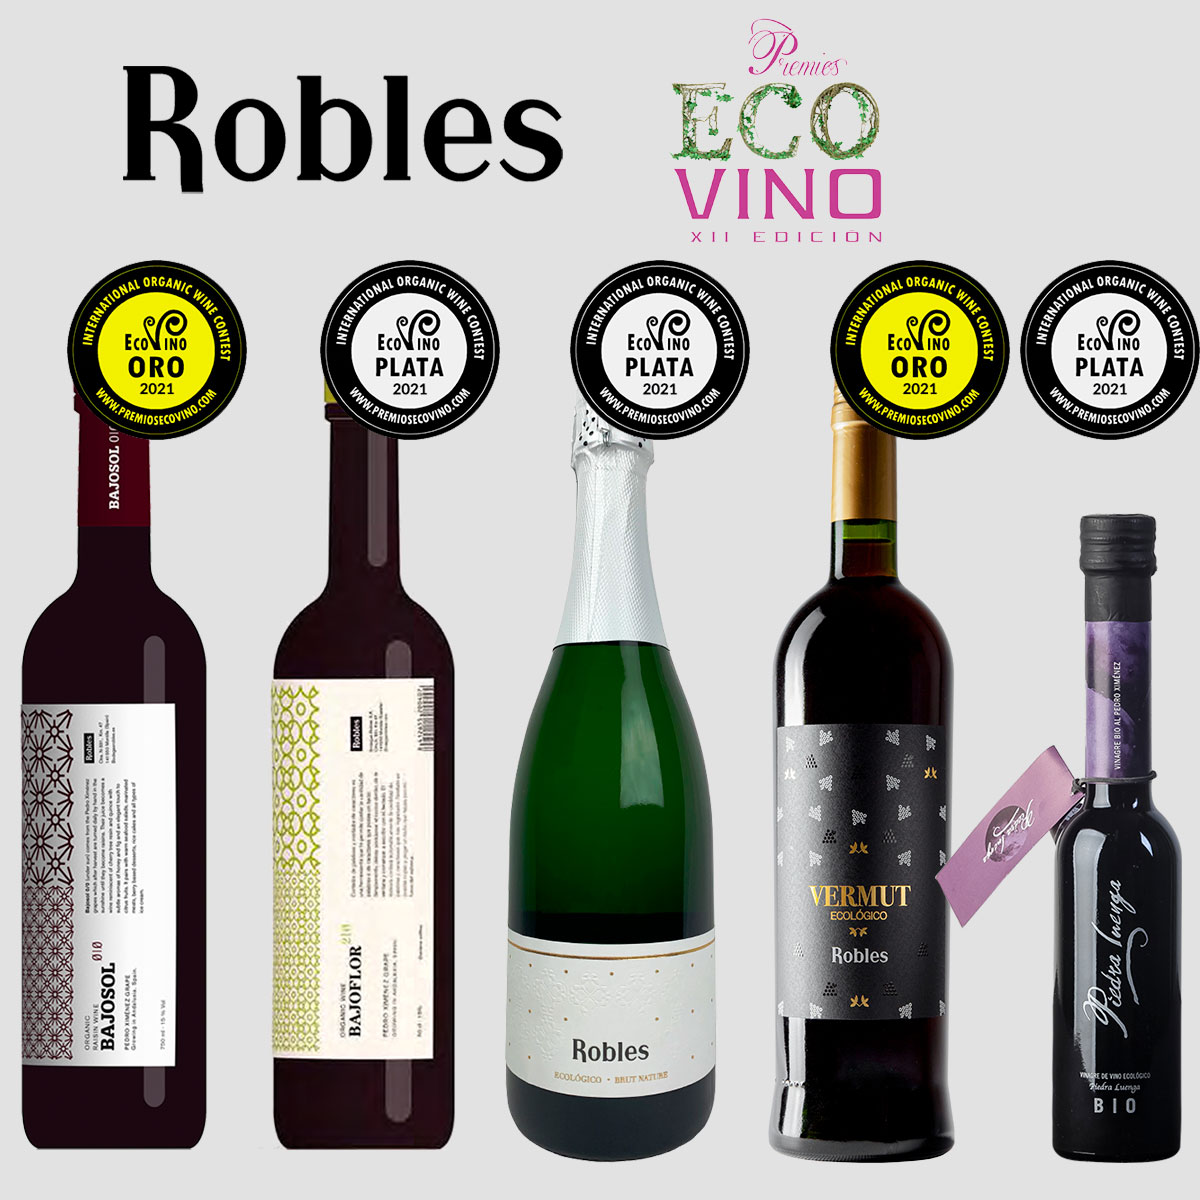 Robles collects five awards in Ecovino 2021